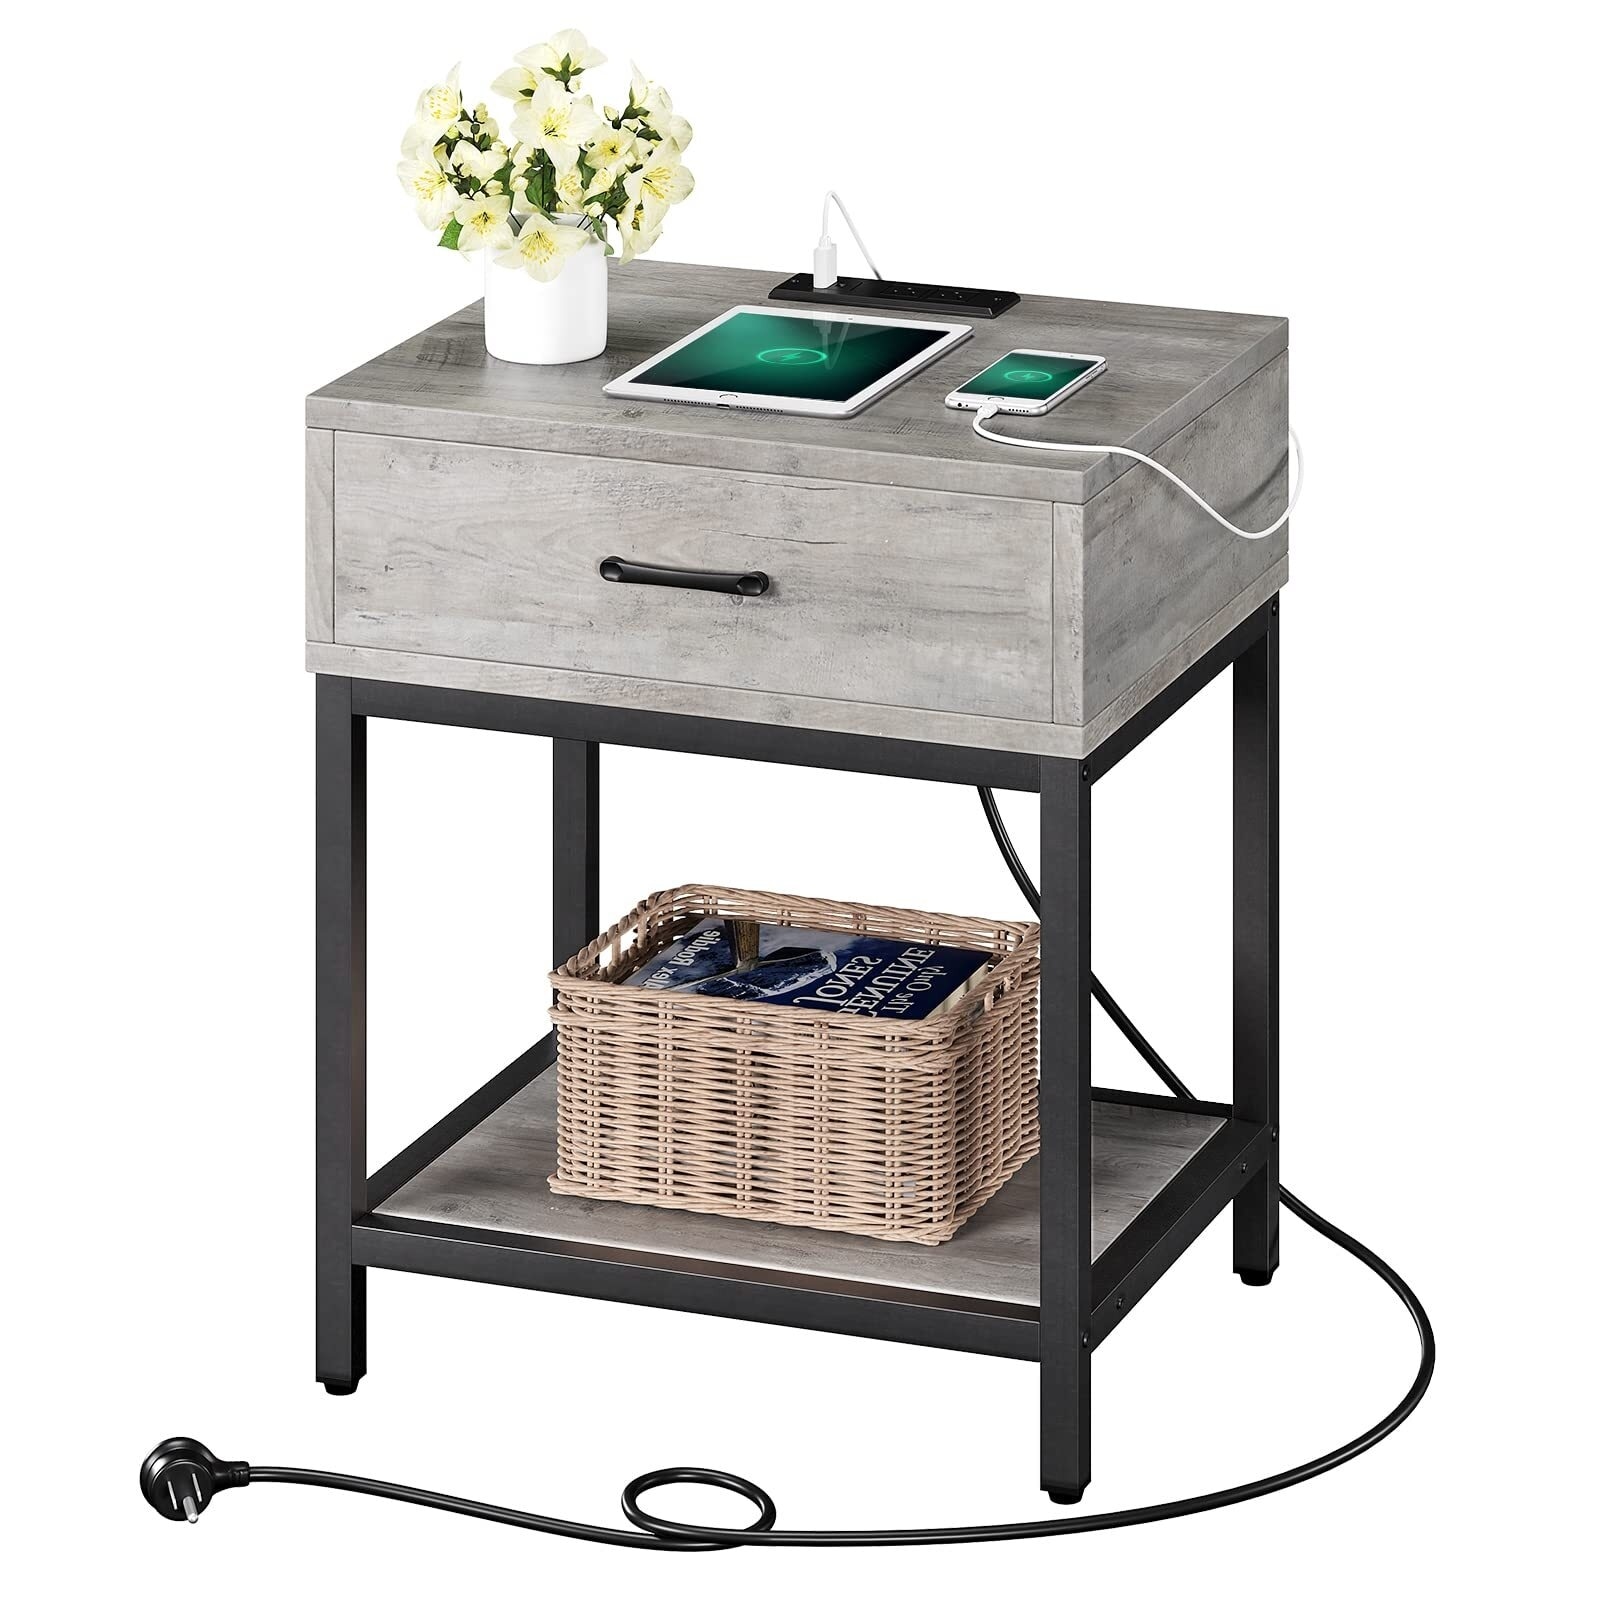 https://ak1.ostkcdn.com/images/products/is/images/direct/4eaf5e0ef56d5c3130edd17f5247a3ca87df67b0/Nightstand-Bedside-Table-with-Charging-Station-Type-C%26USB-Ports.jpg